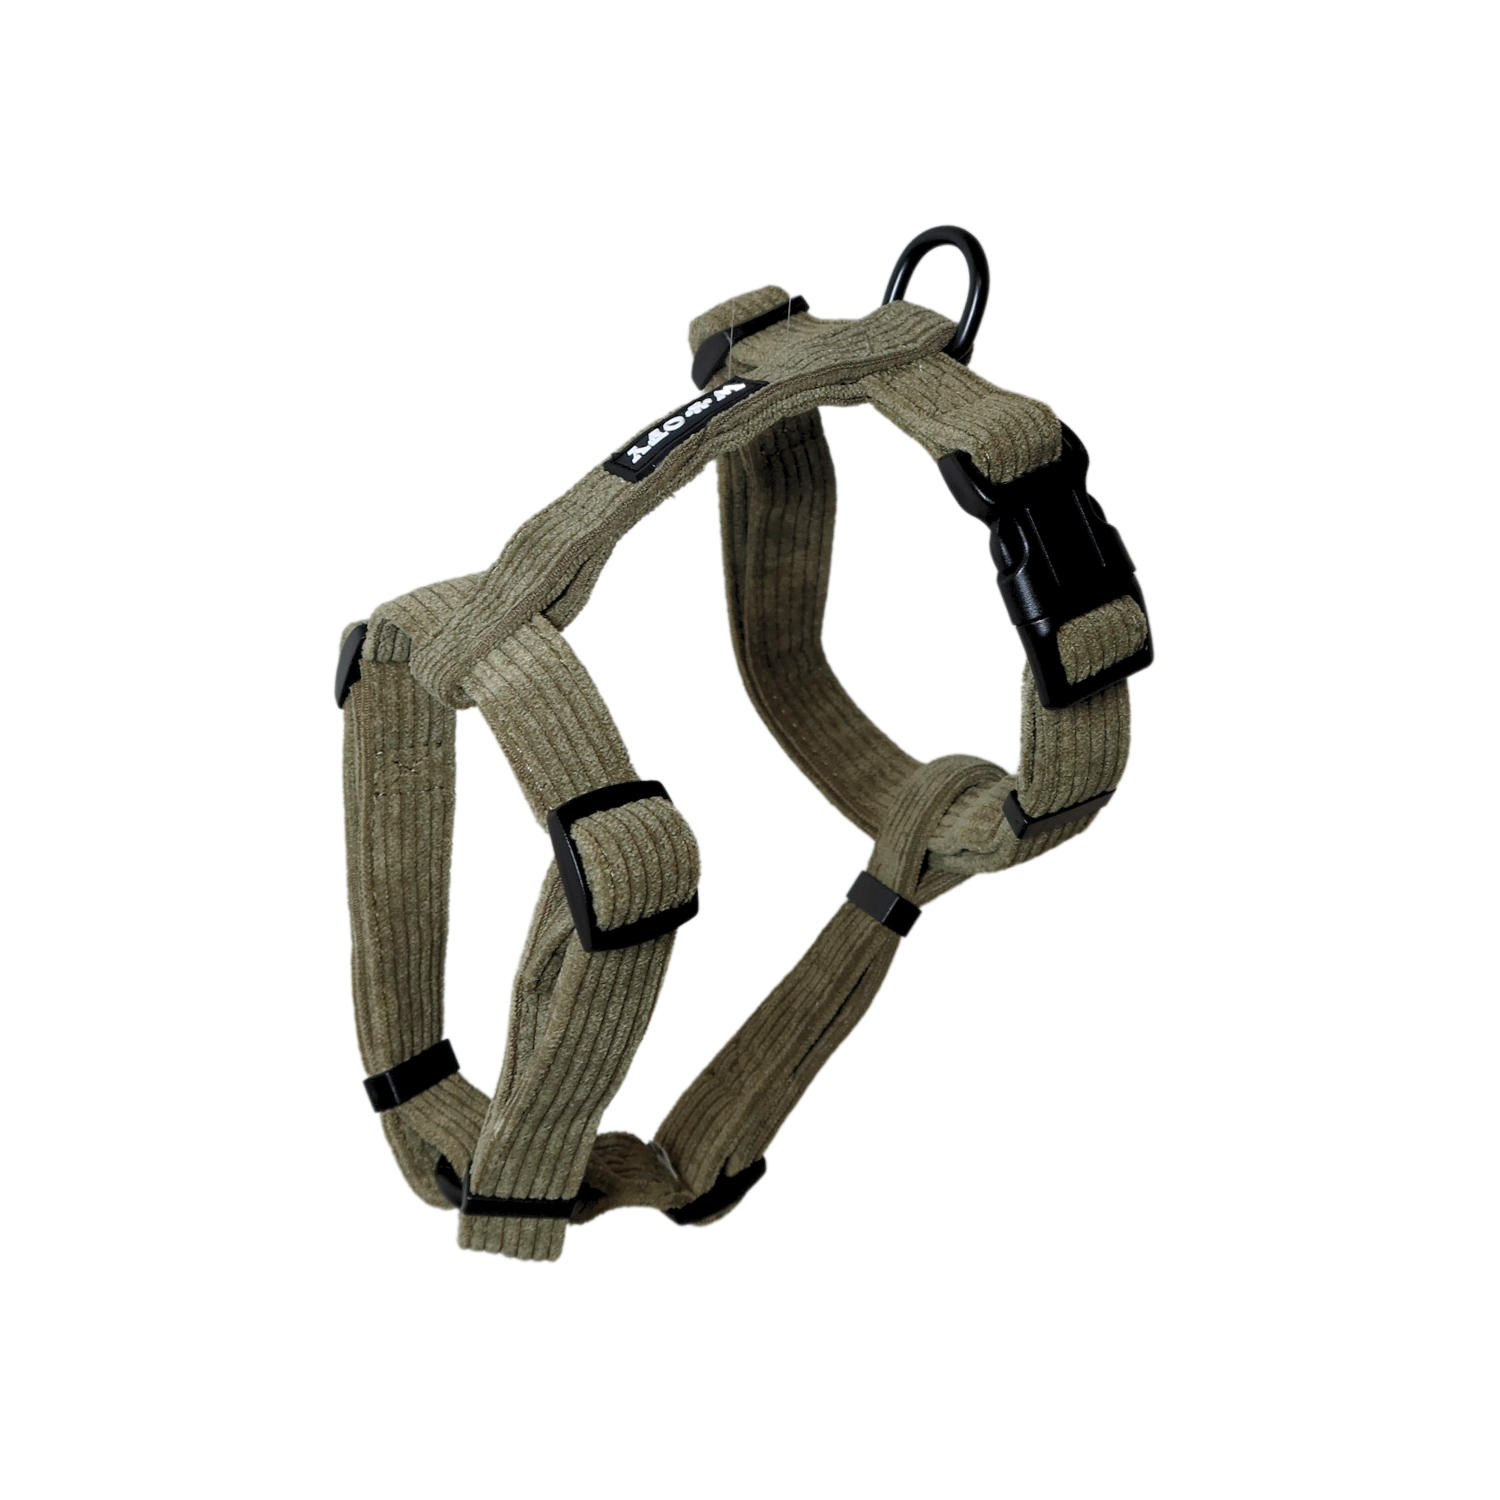 Y-harness green #forest